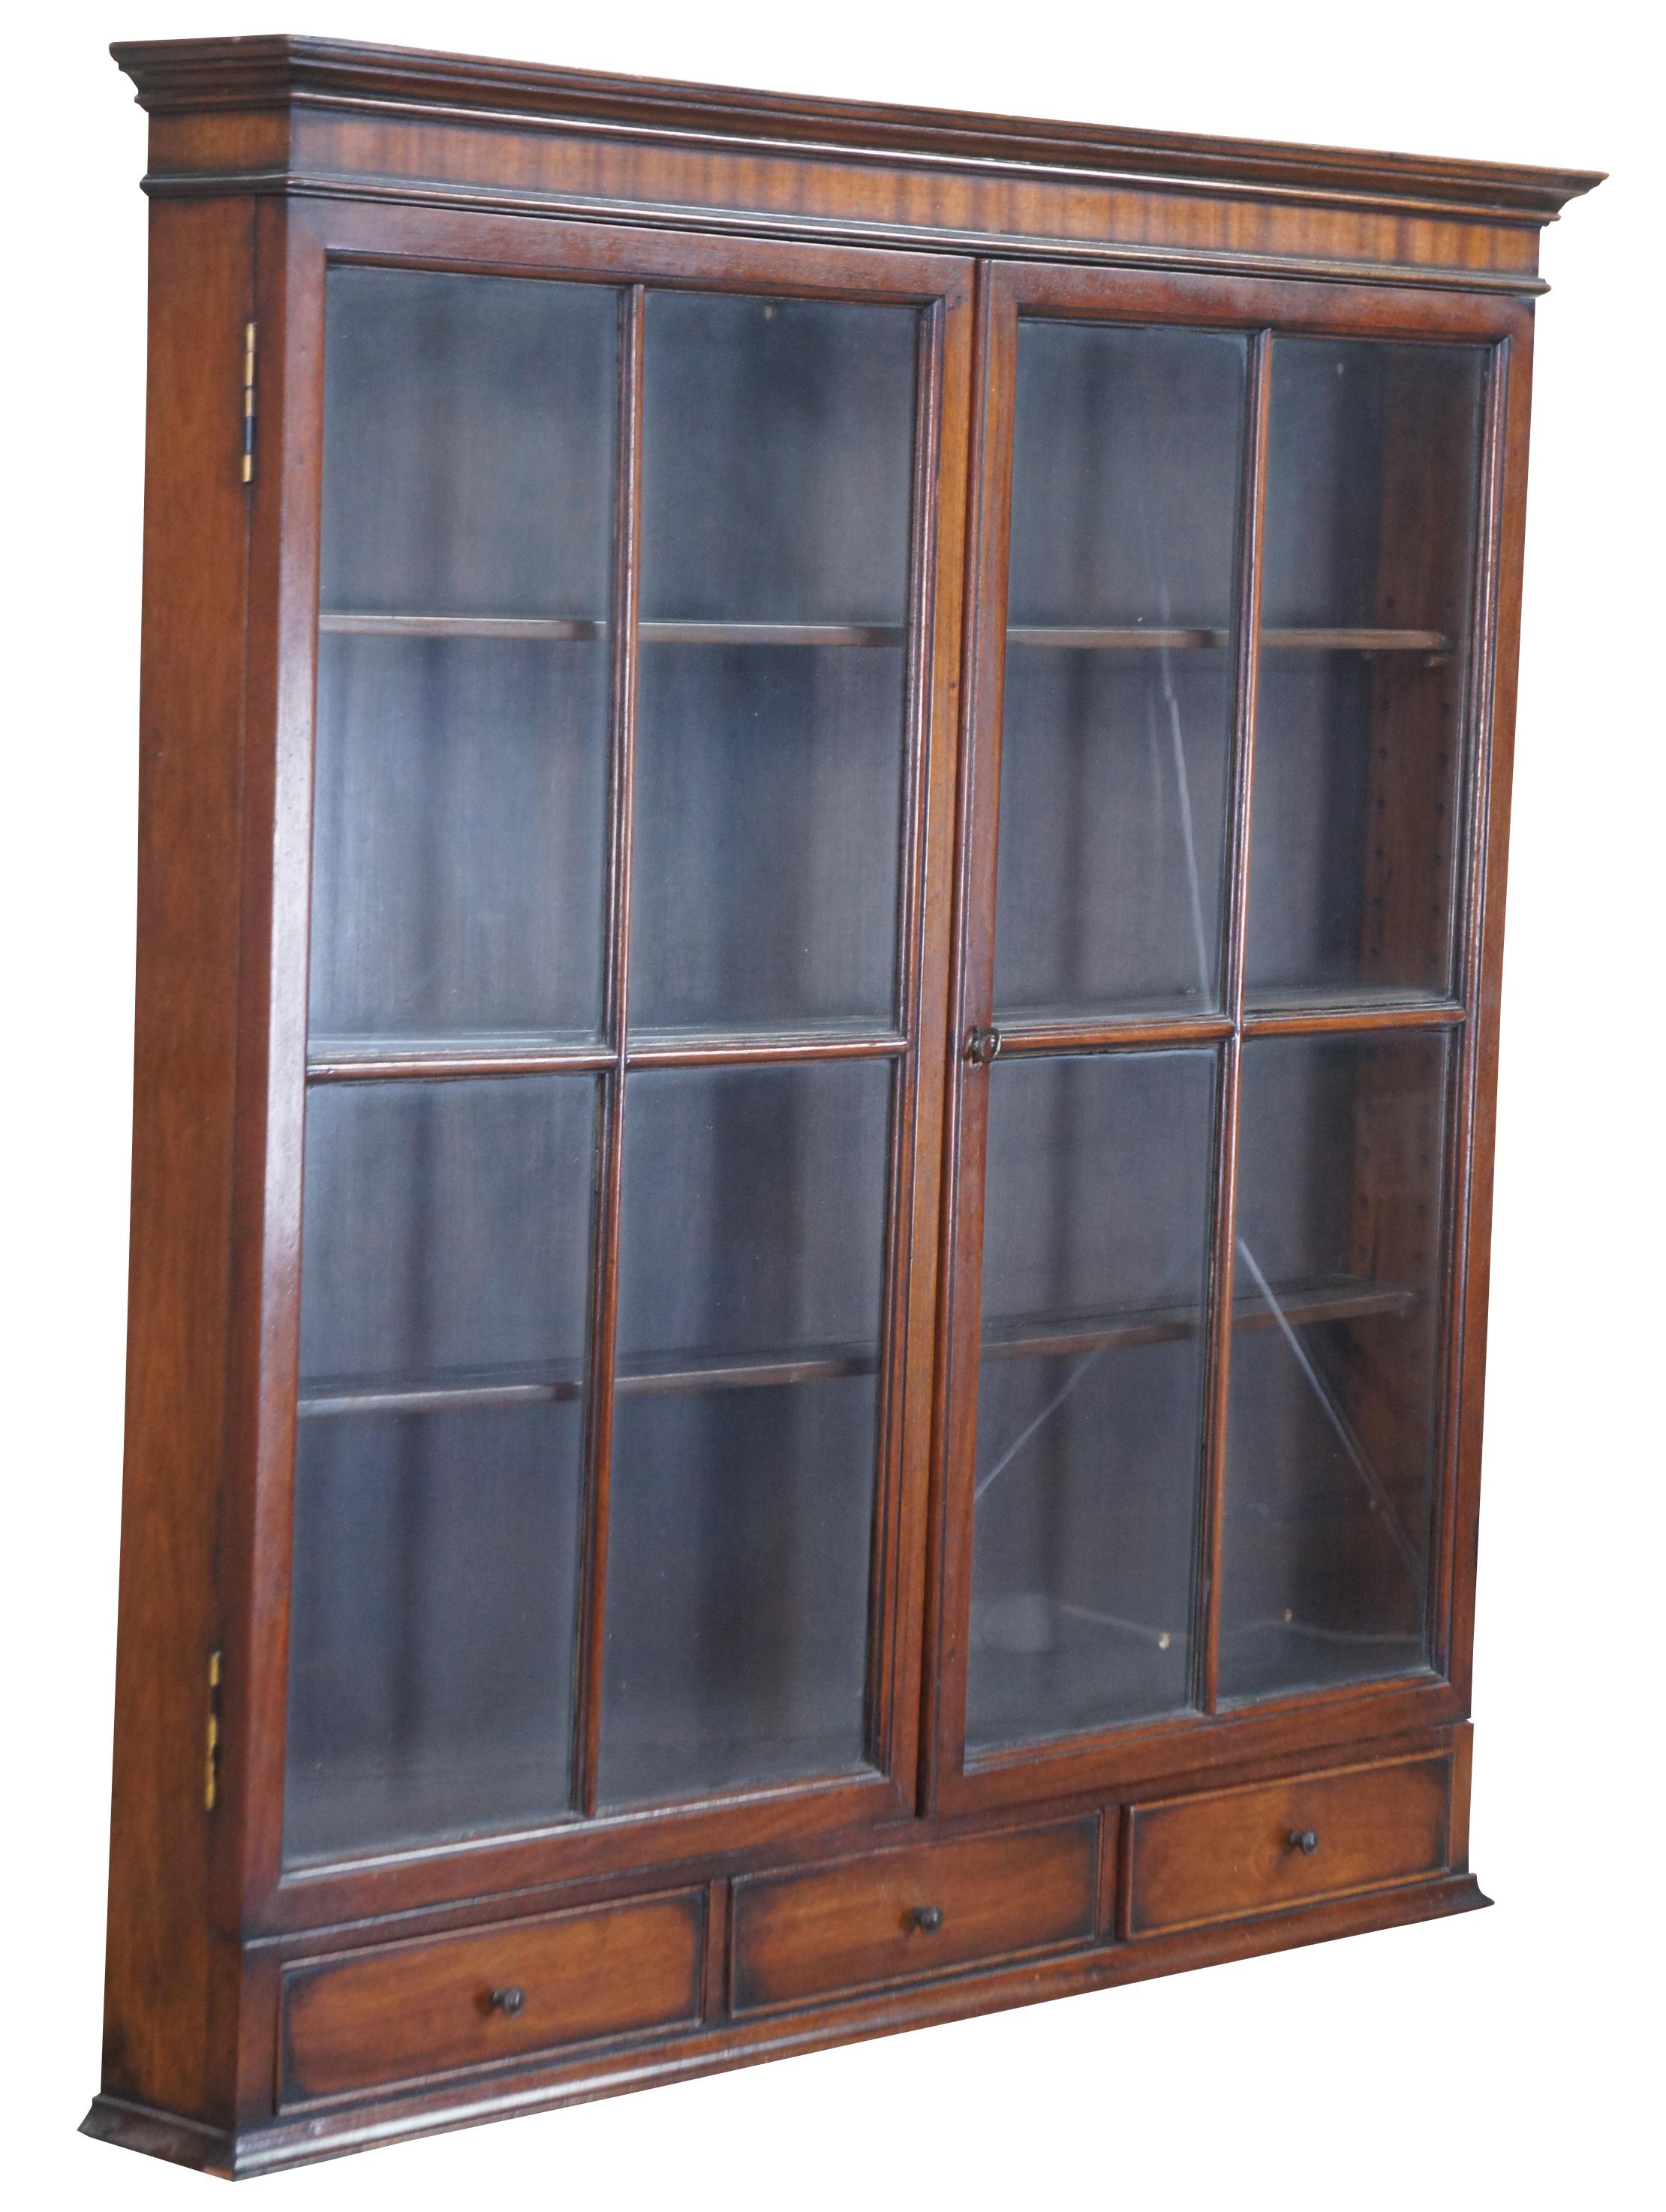 Petite wall curio or display cabinet in the manner of Georgian styling, Circa mid 20th century. Made of mahogany featuring three interior adjustable wood shelves, paned glass doors, and three lower drawers.
   